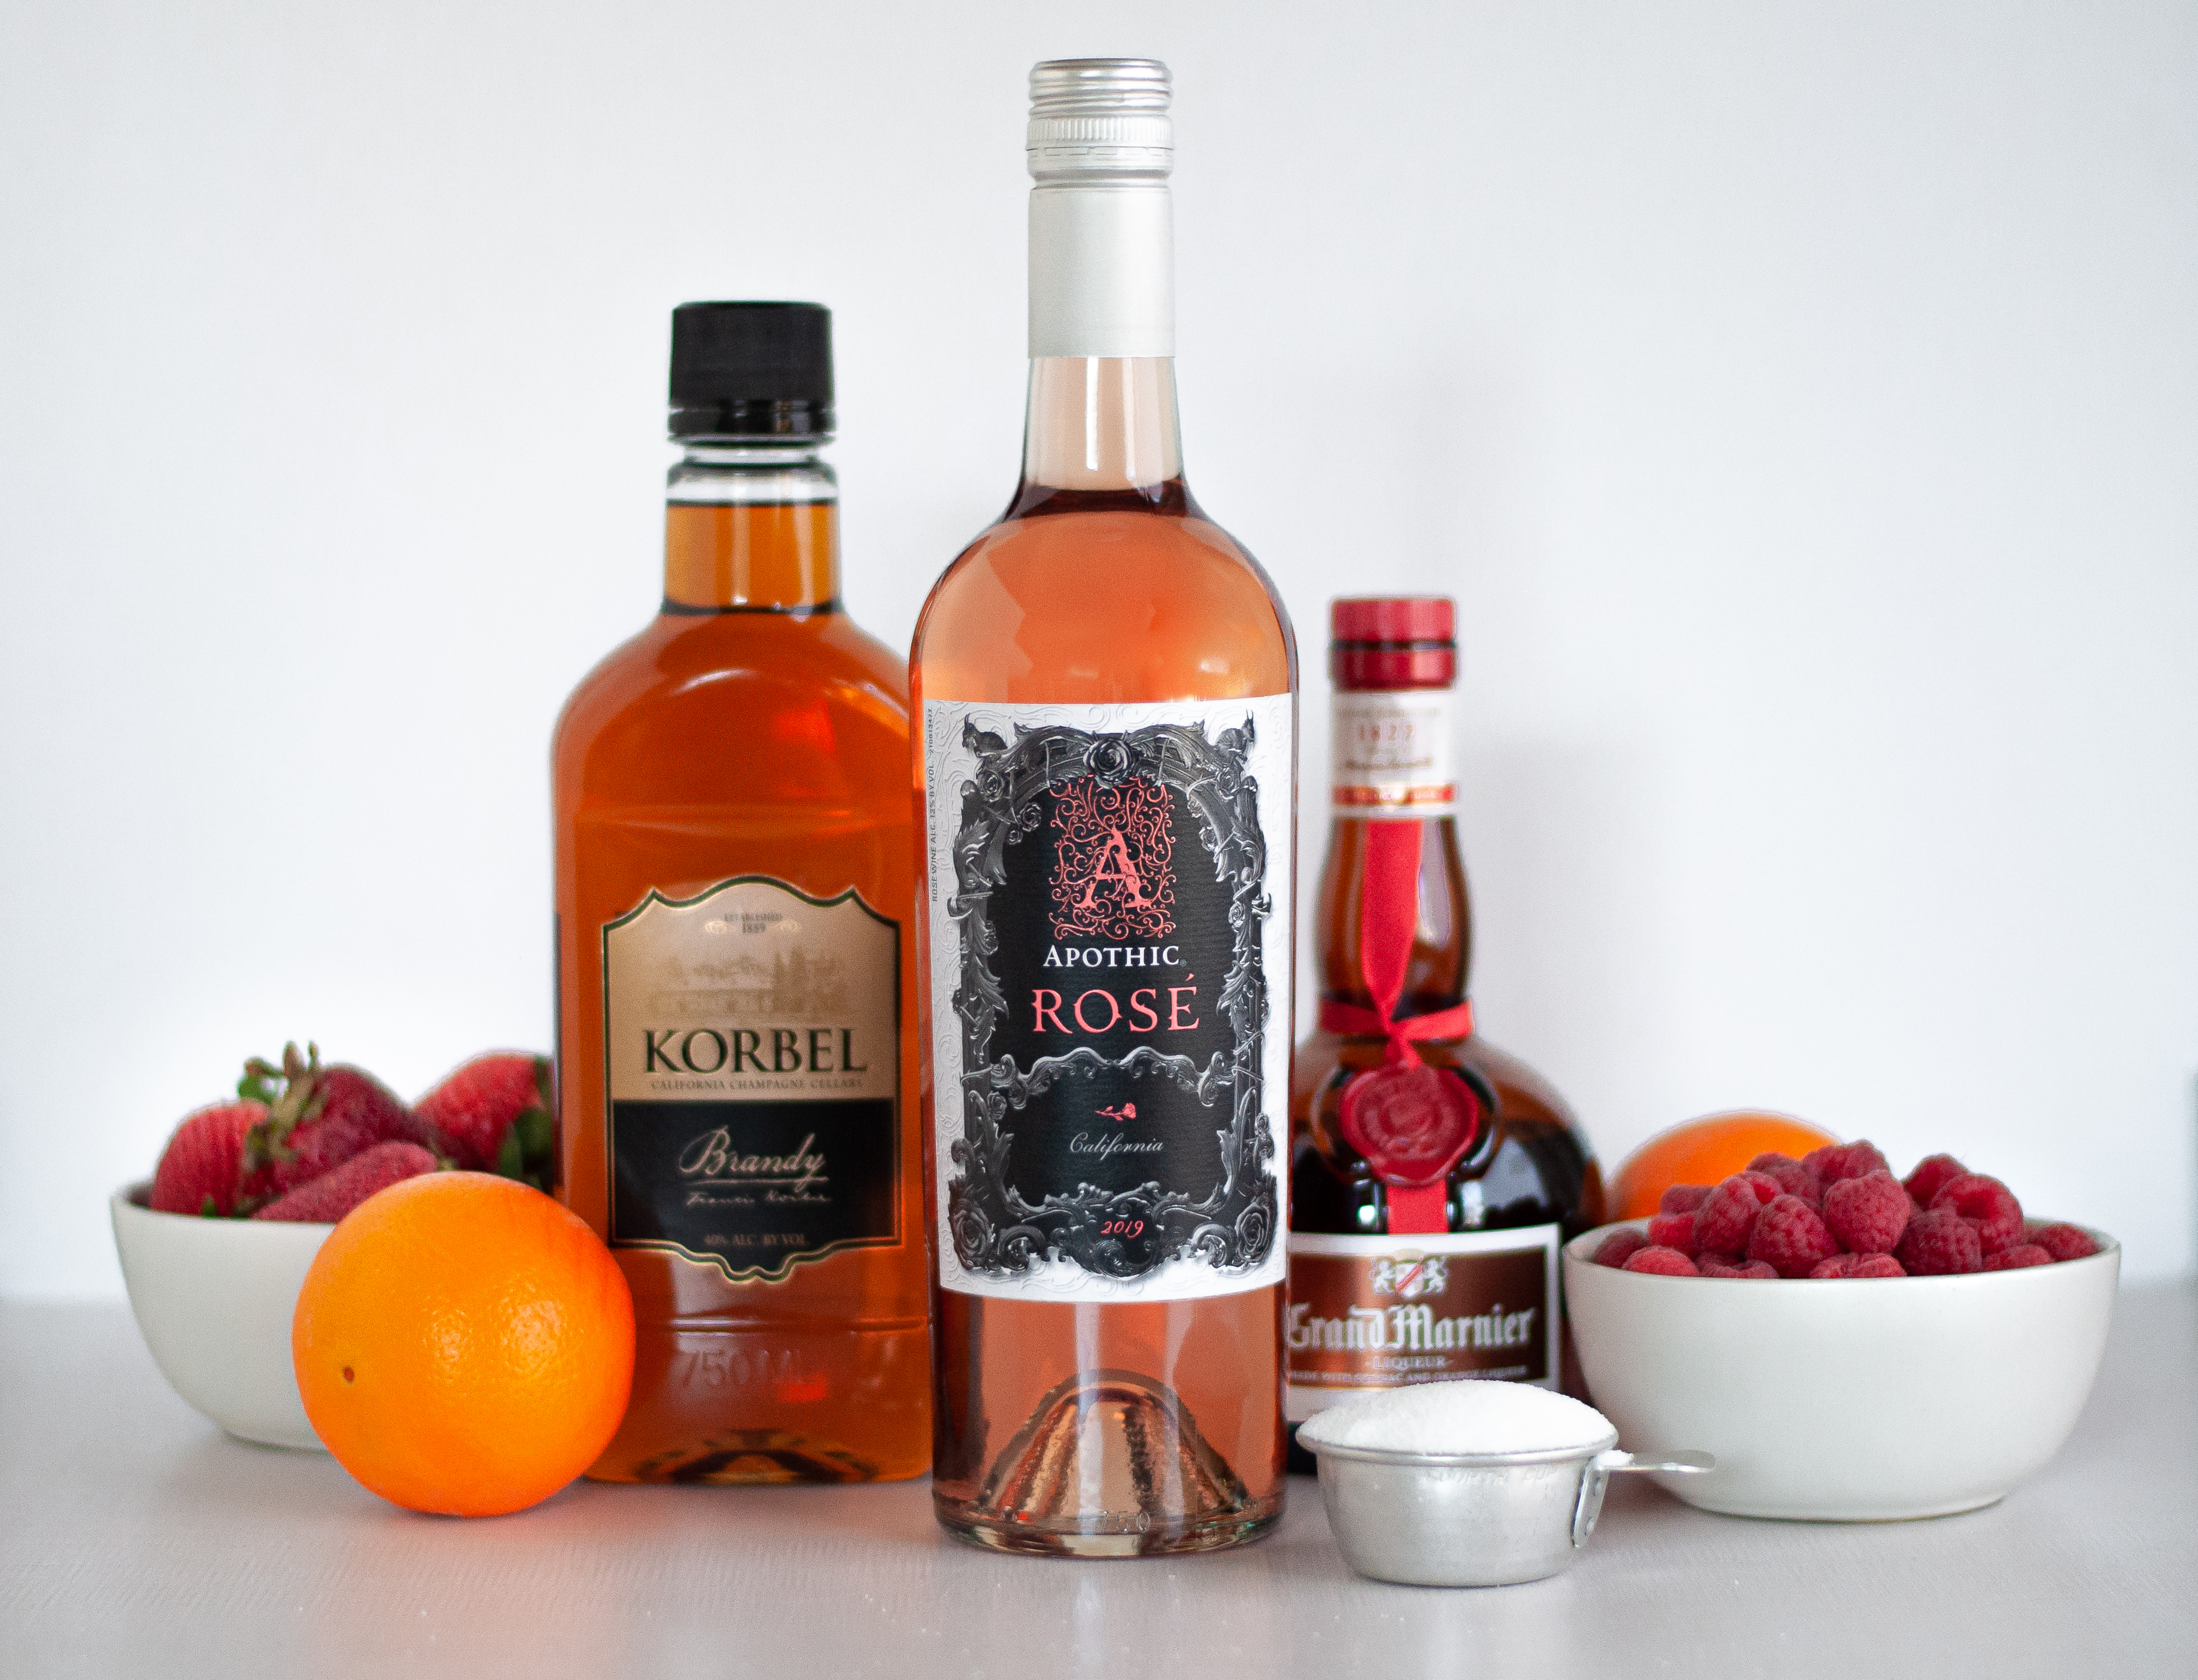 Ingredients for rosé sangria, including a bottles of rosé wine, Korbel brandy, and Grand Marnier. A 1/4 cup measure filled with granulated sugar, 2 oranges, and bowls of strawberries and raspberries.